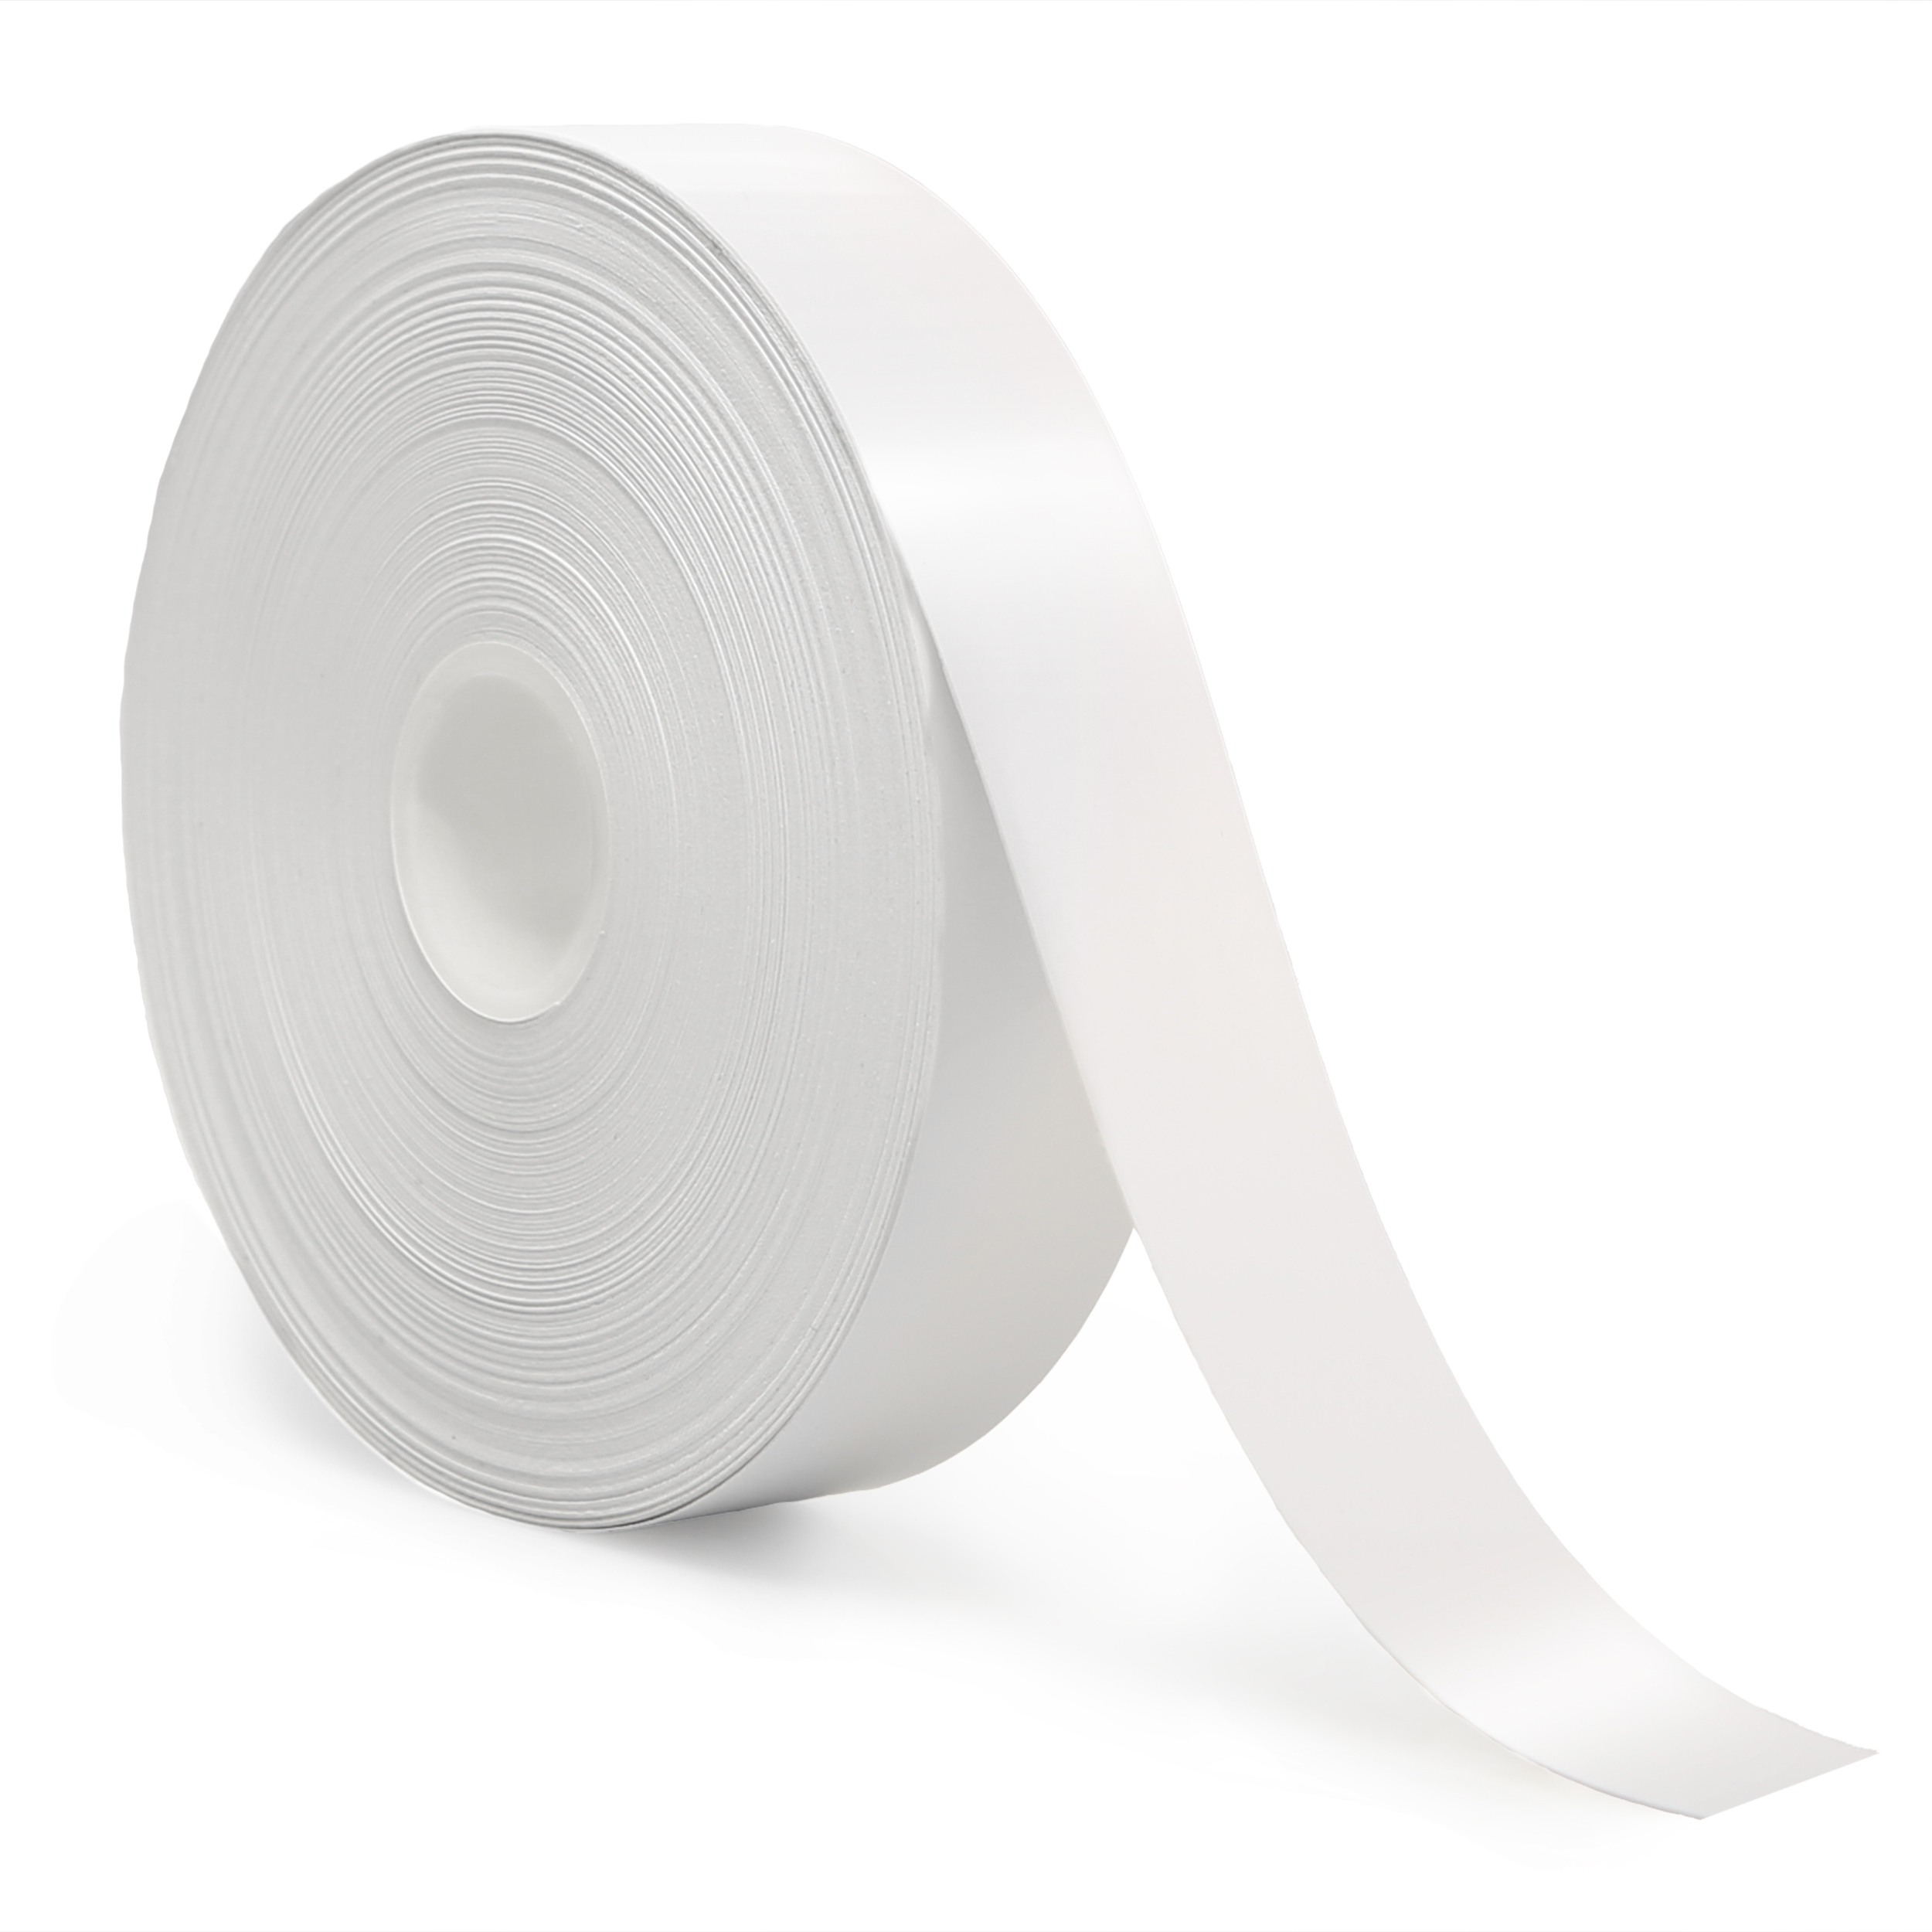 Vinyl Label Material Buy Our White Premium Vinyl Tape Industrial Safety Solutions